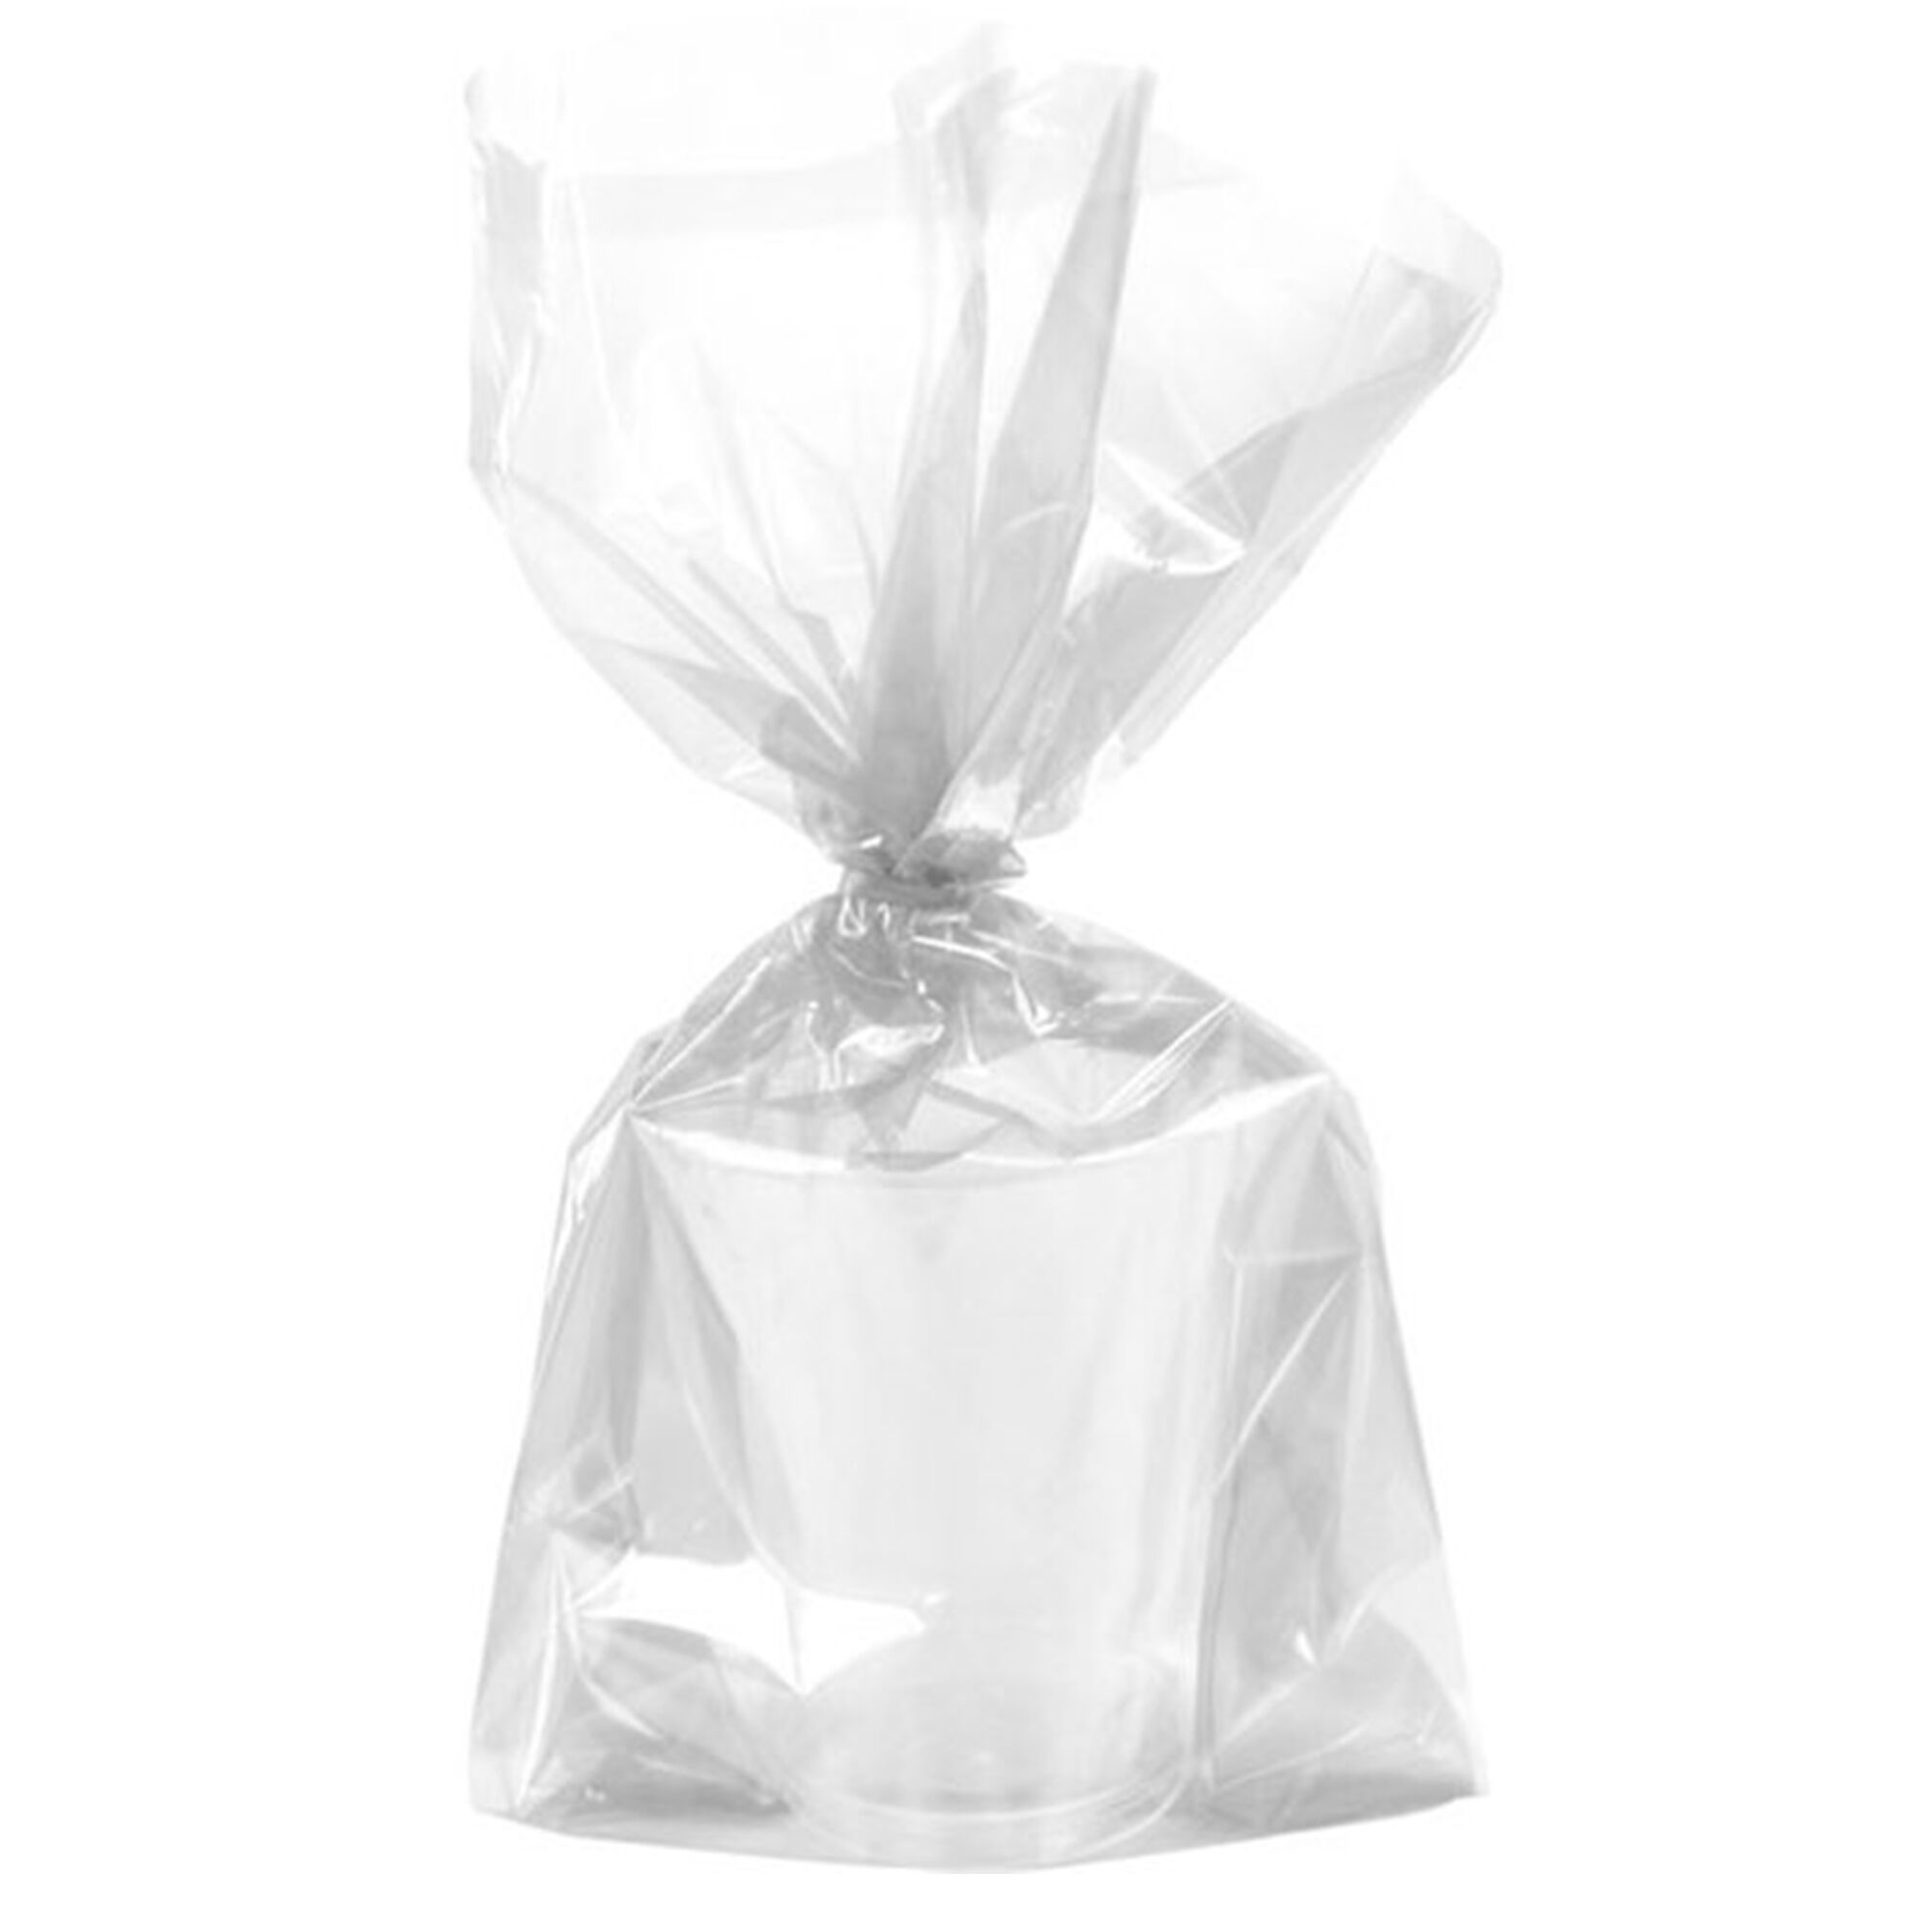 Cellophane Bags, Treat Bags, Clear Cellophane Gift Bags, Self Adhesive  Sealing Plastic Gift Bags, Resealable Cellophane Bag for Pretzel rods,  Candy, Snack 2 x 8 Inch pretzels individual bags 100 Pcs - Yahoo Shopping